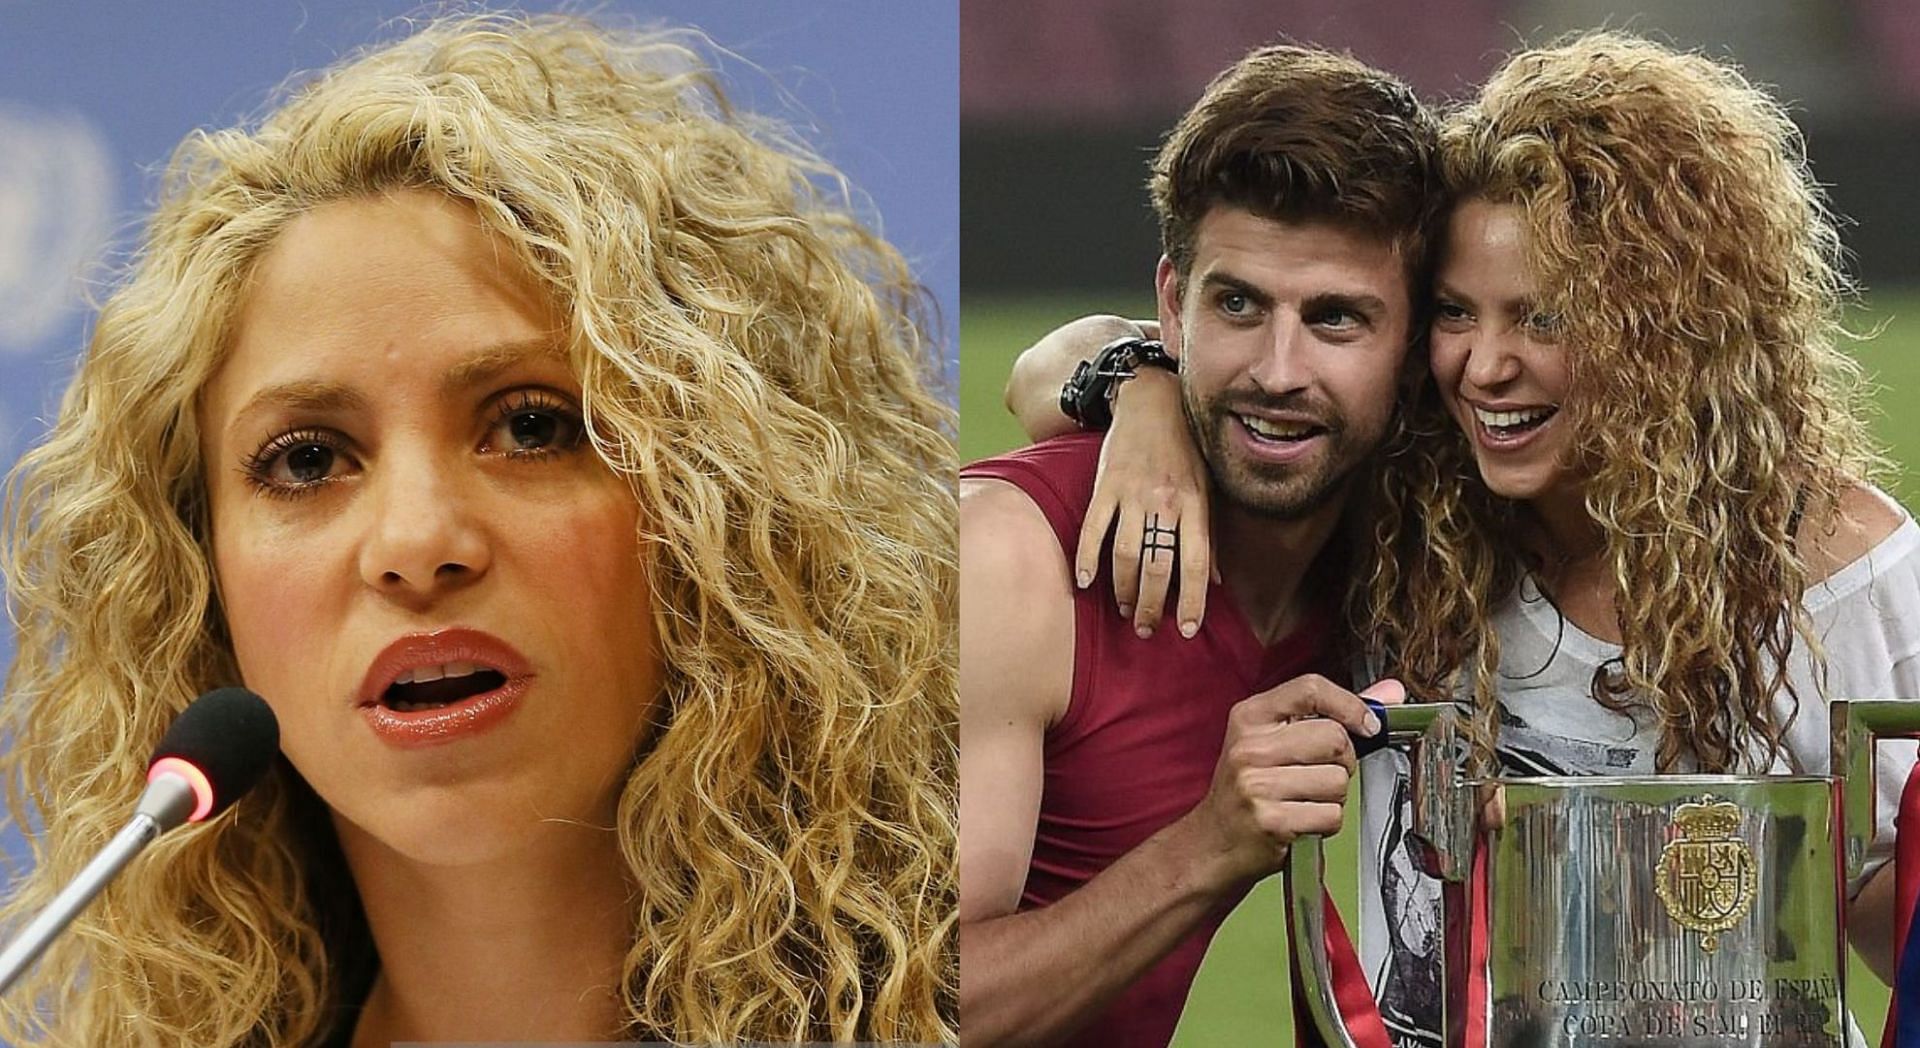 What did Shakira say about Pique and Clara Chia? BZRP lyrics explored as singer's scathing lyrics send Twitter into a frenzy